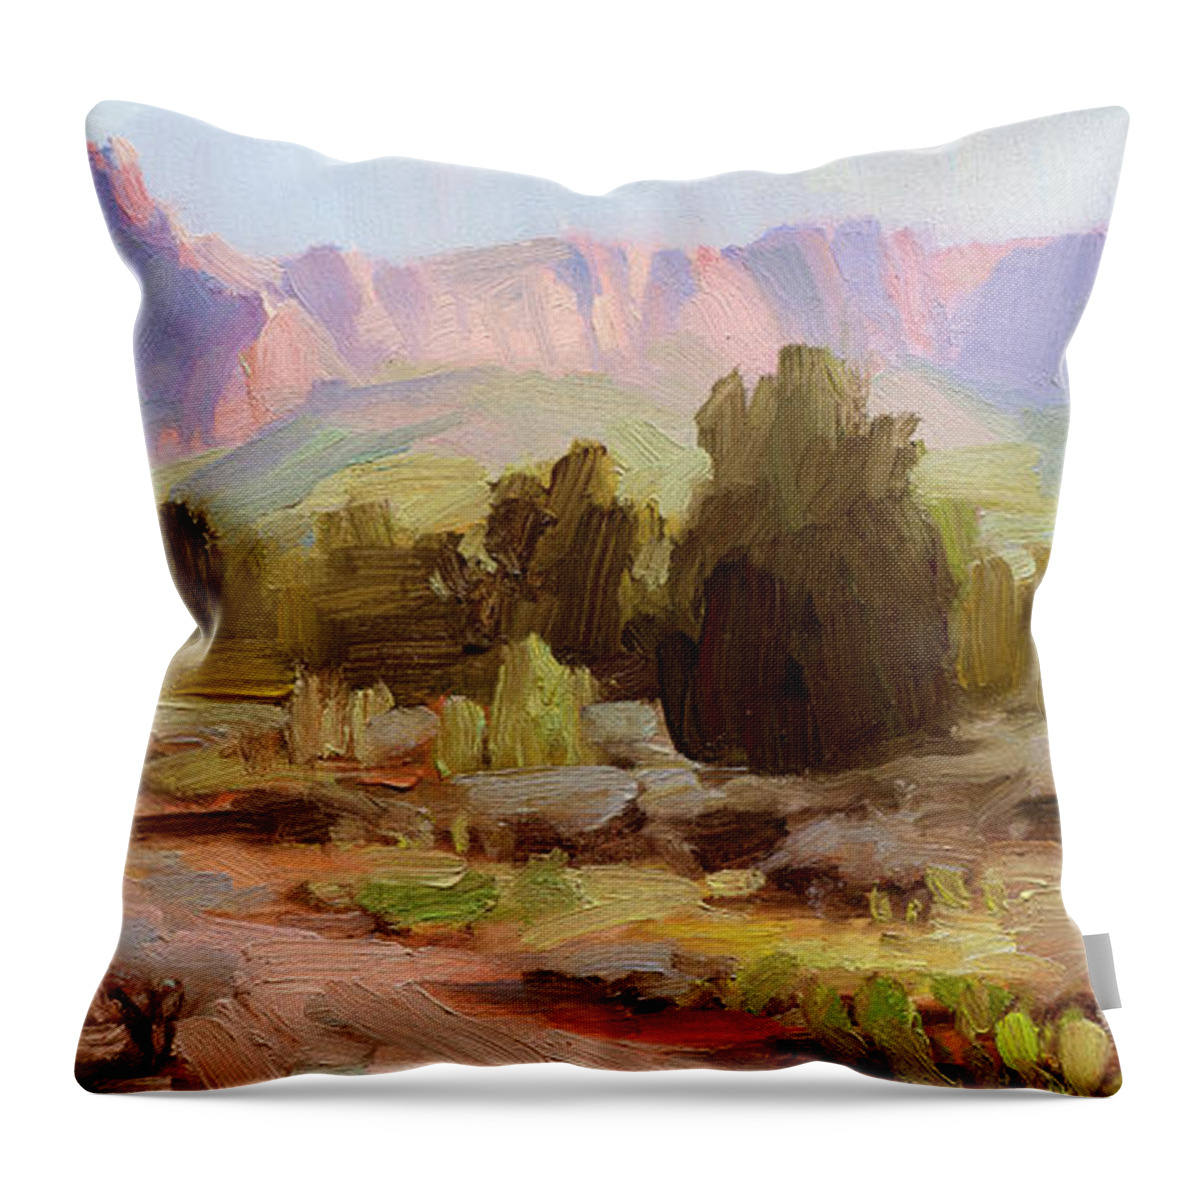 Zion Throw Pillow featuring the painting On the Chinle Trail by Steve Henderson